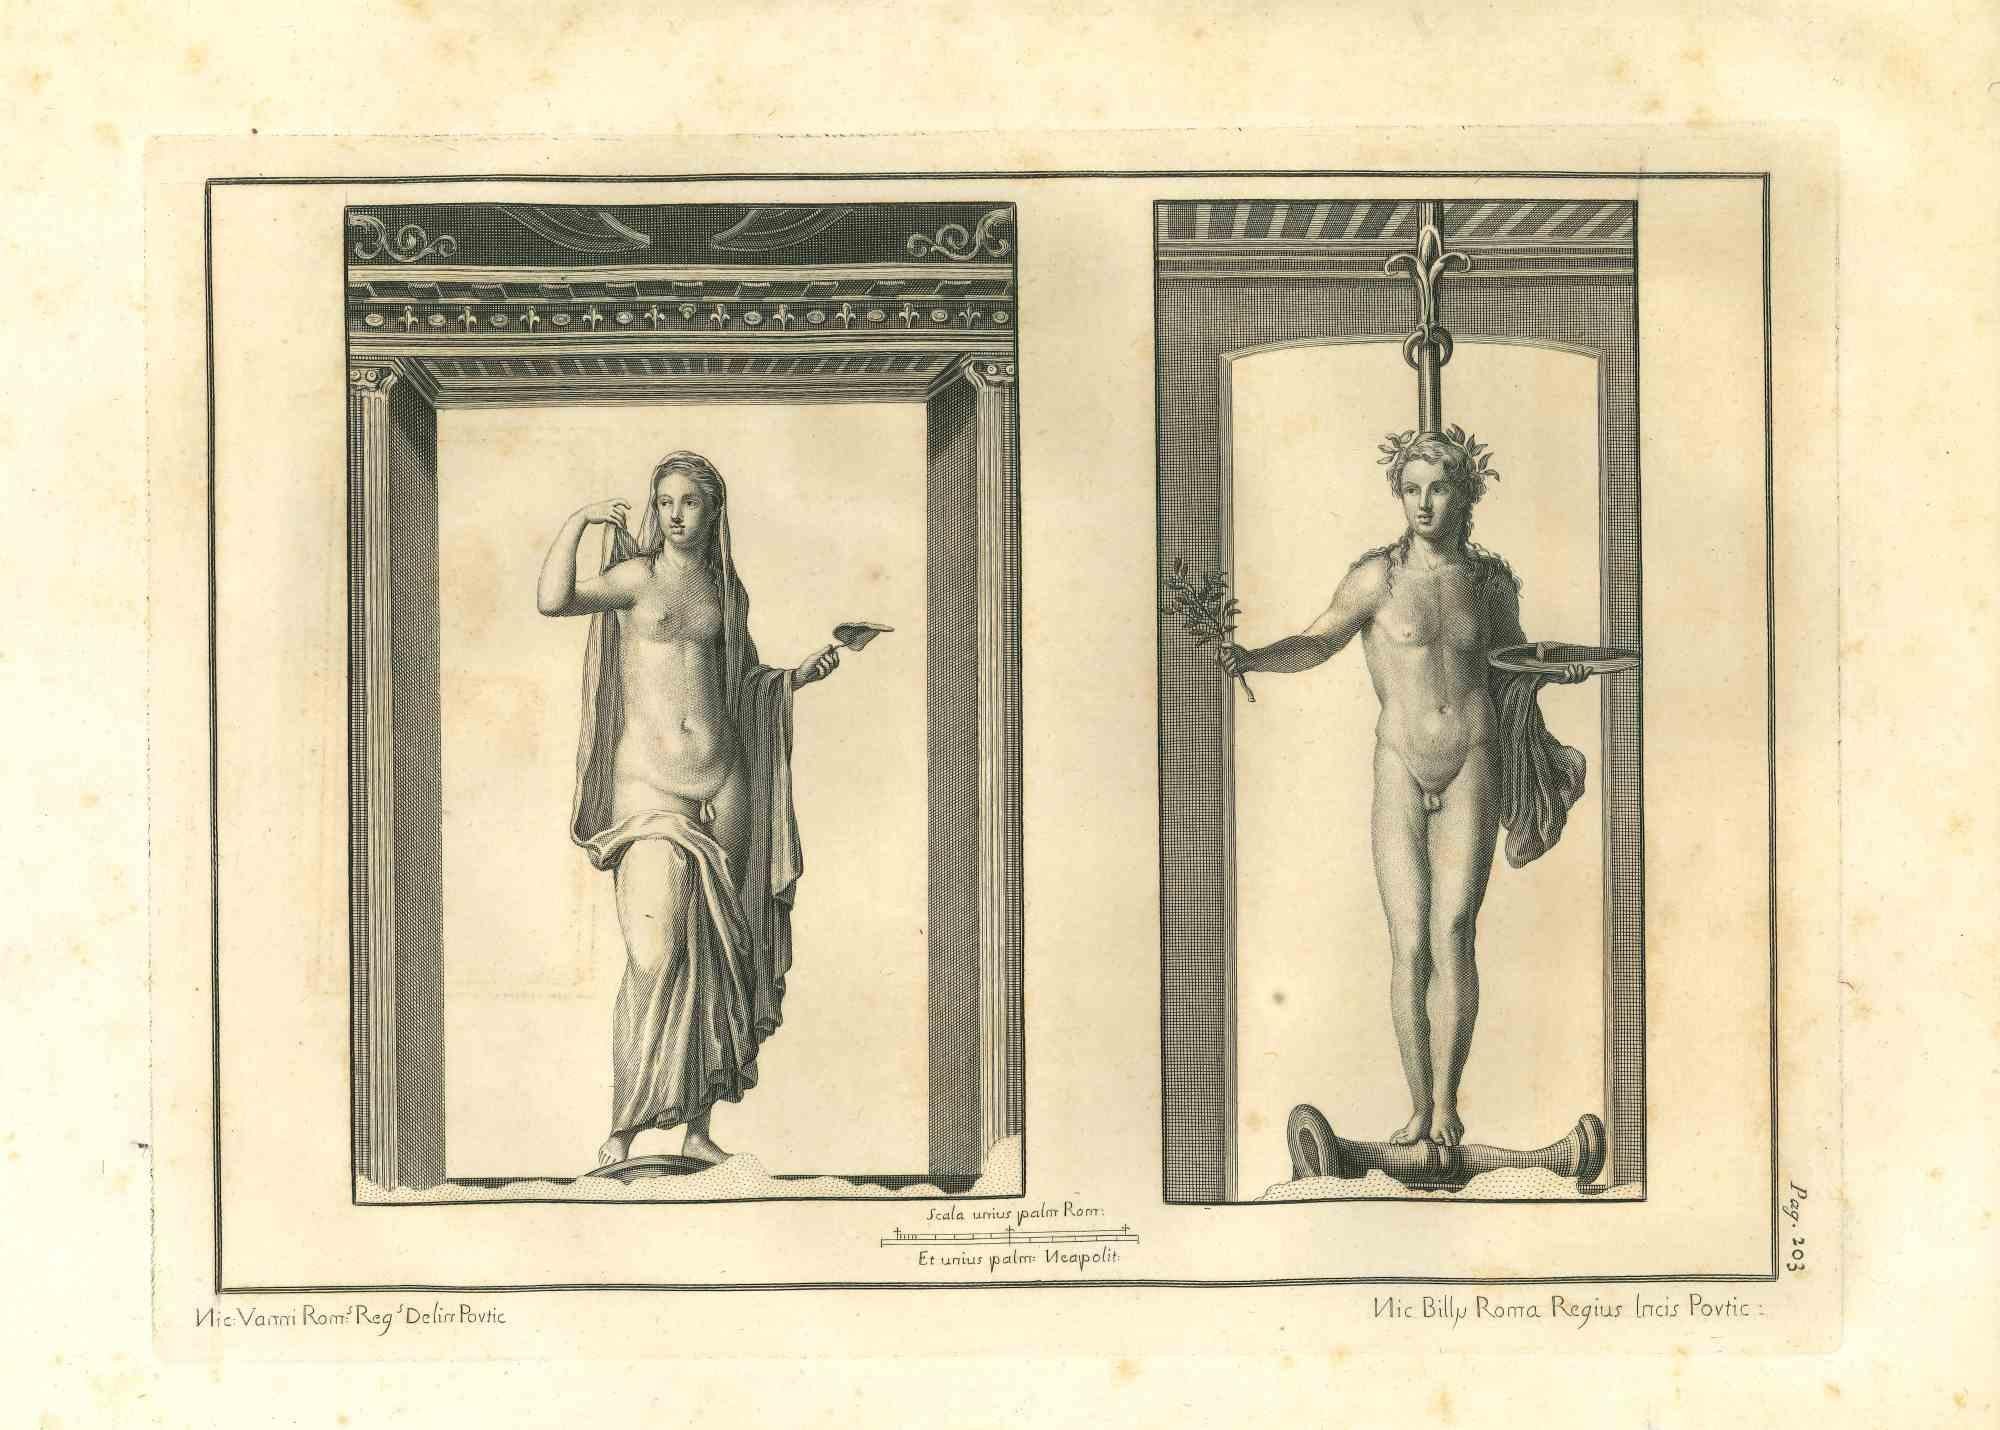 Ancient Roman Statues - Original Etching by Nicola Billy - 18th Century